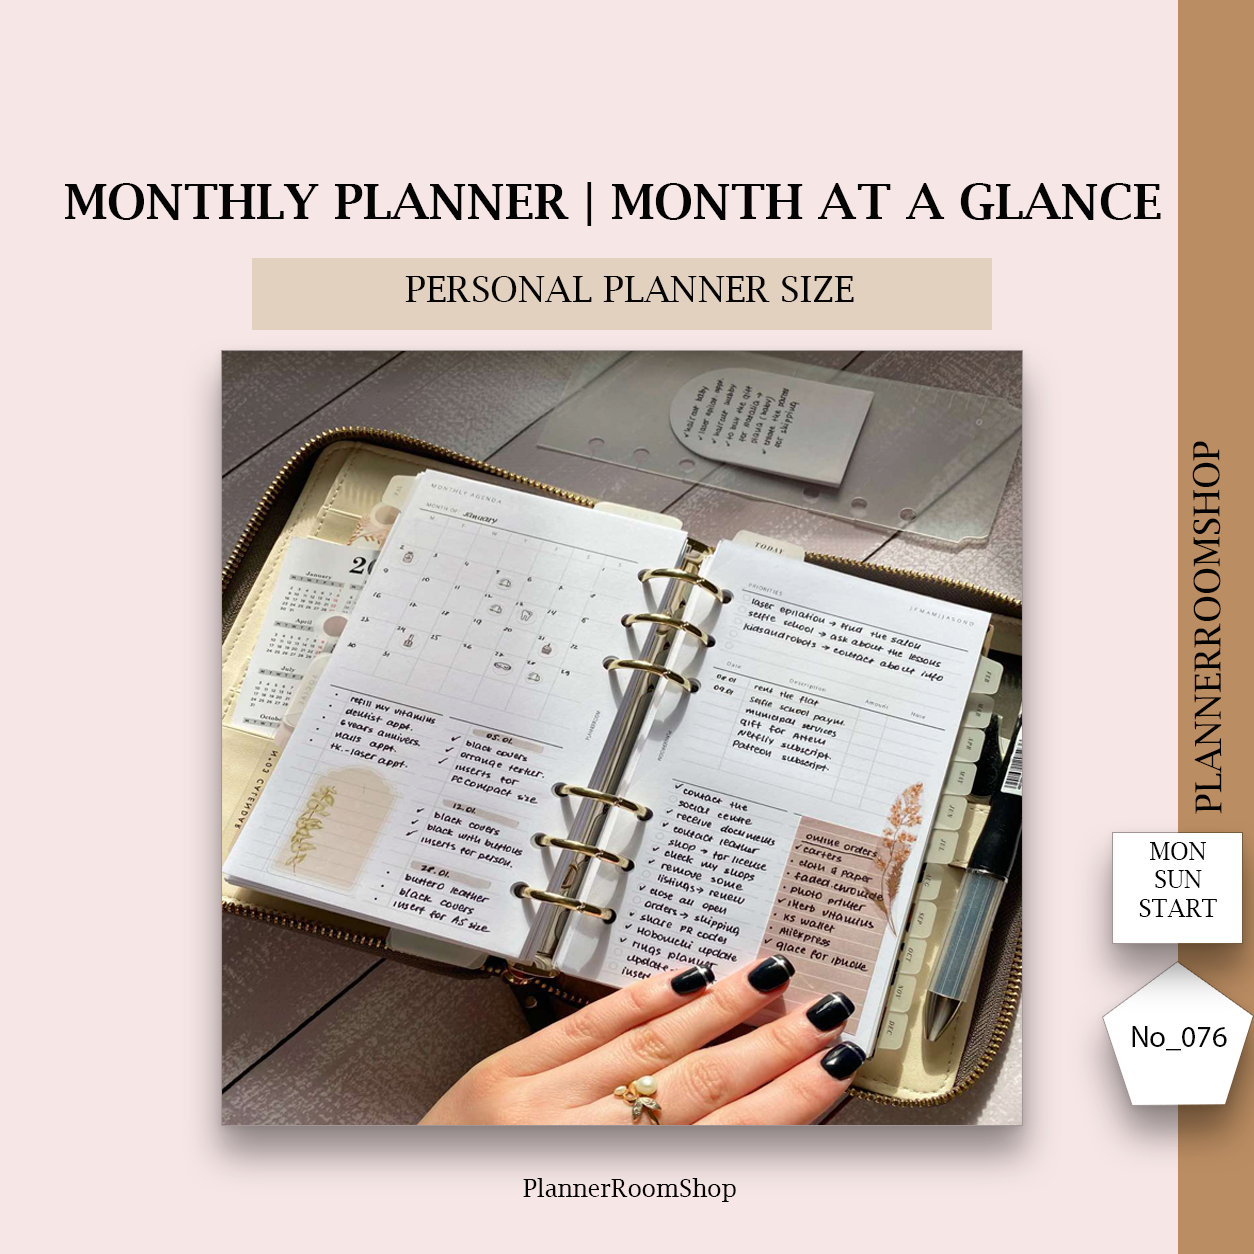 Monthly planner | Printable inserts - 076